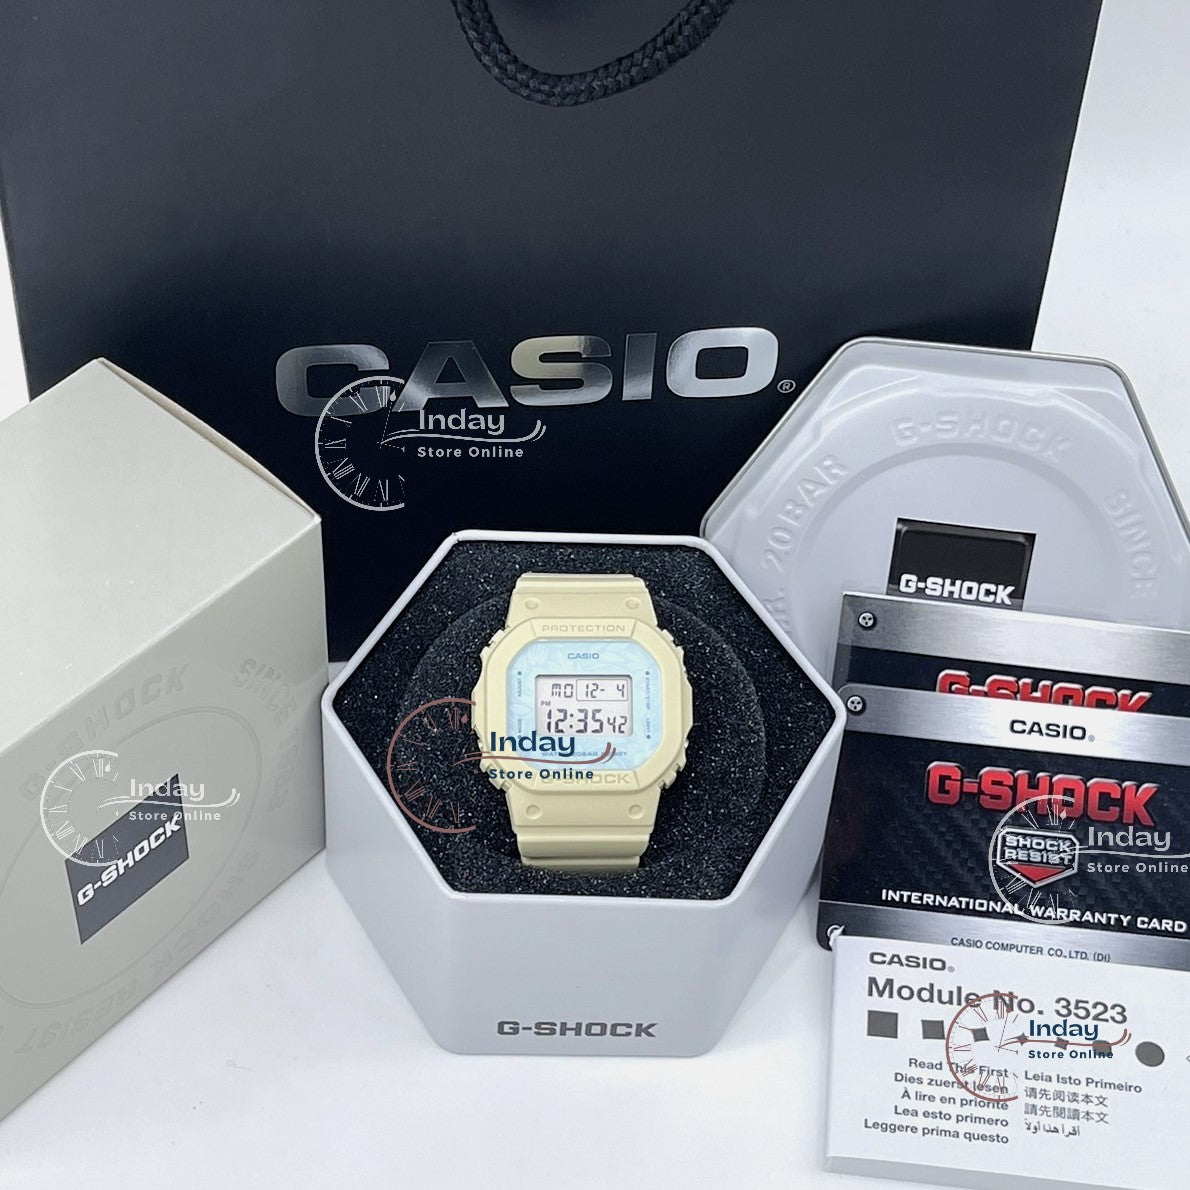 Casio G-Shock Women's Watch GMD-S5600NC-9 Digital Bio-based Resin Band Shock Resistant Mineral Glass